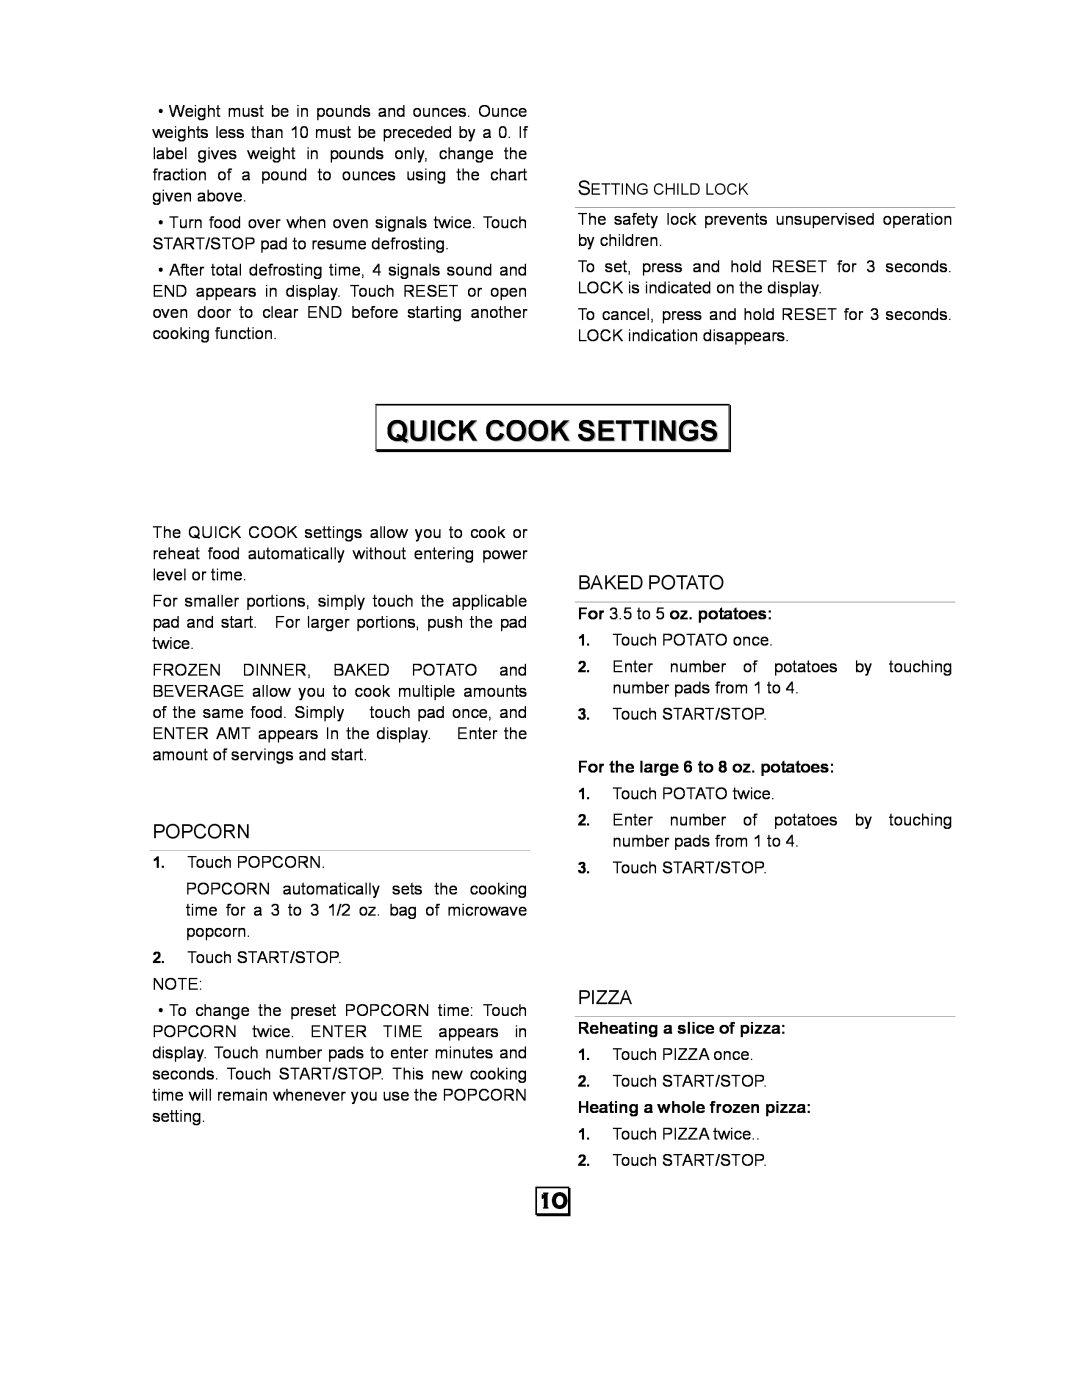 Kenmore 87043 owner manual Quick Cook Settings, Popcorn, Baked Potato, Pizza 